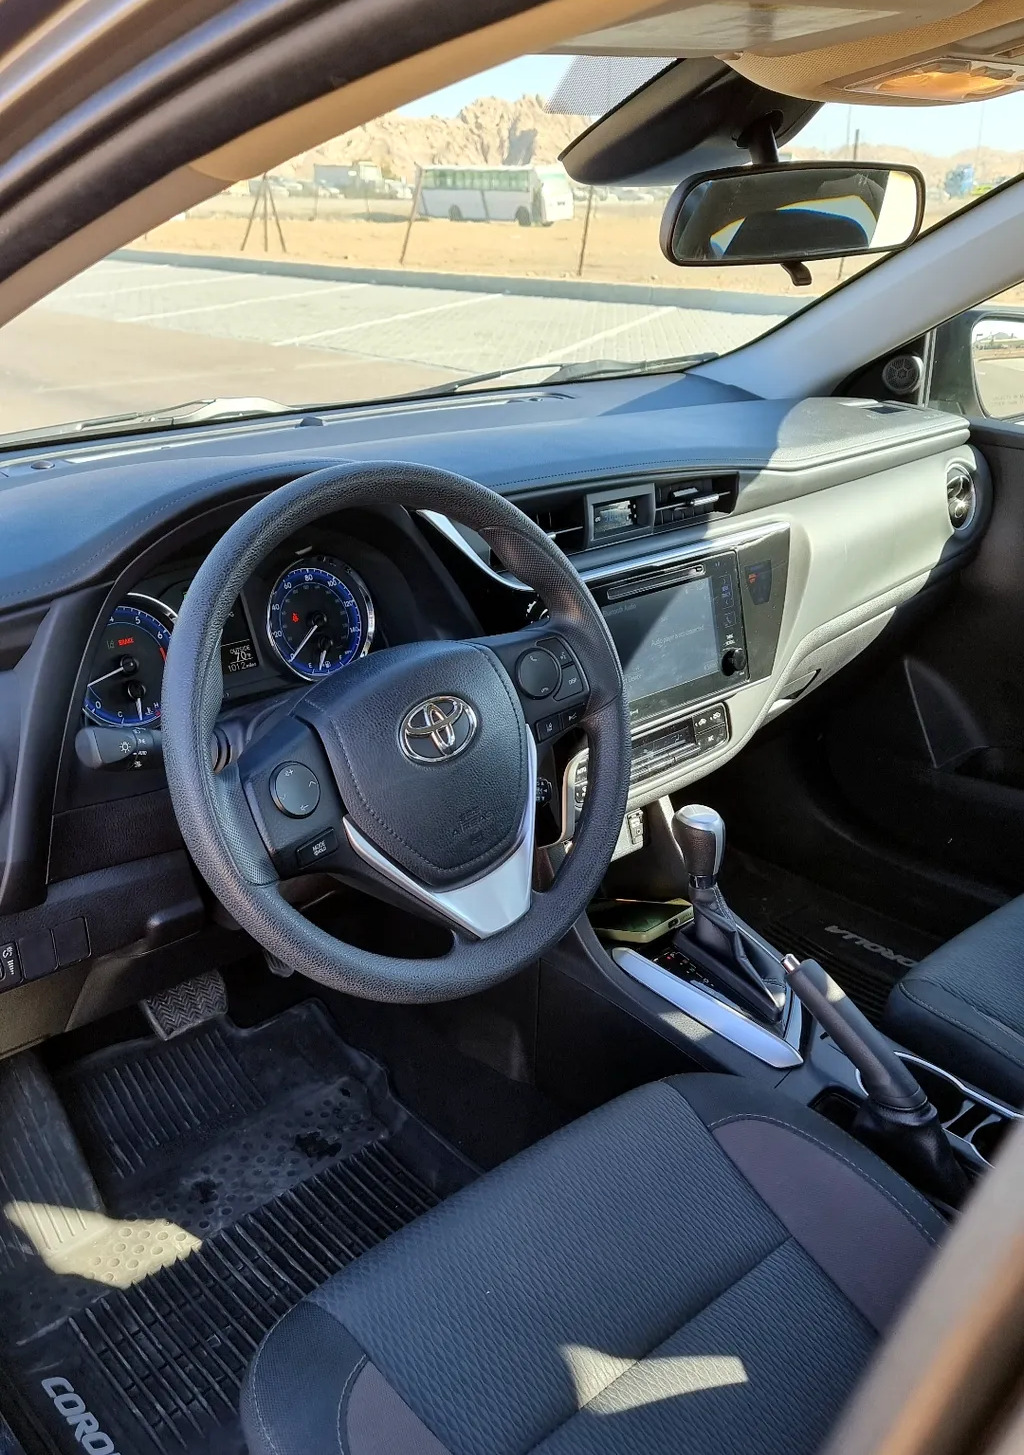 Toyota Corolla 2019 at an affordable price